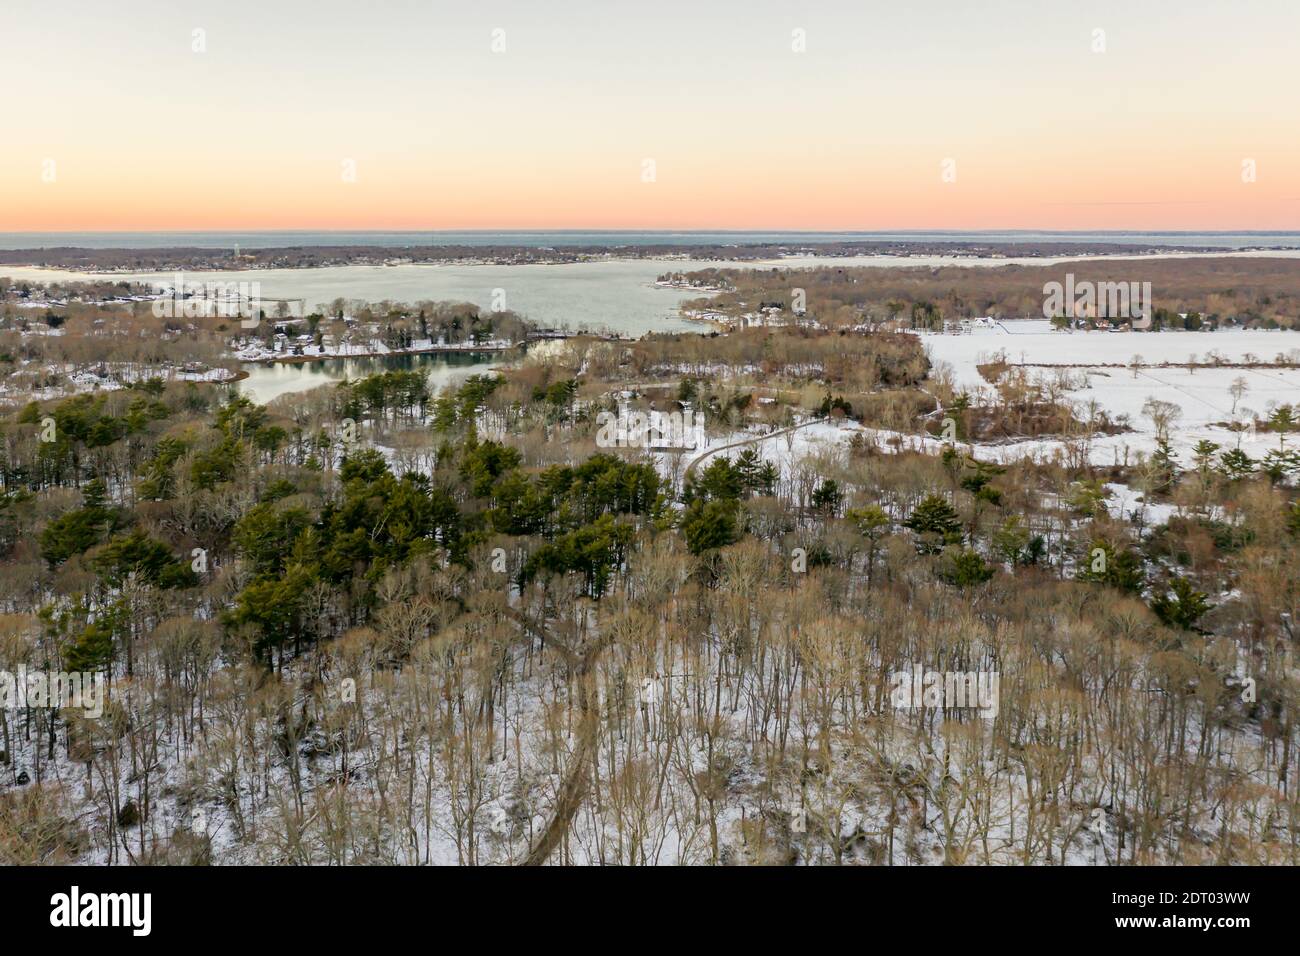 Aerial view of Sylvester Manor and Dering Harbor in the distance Stock Photo